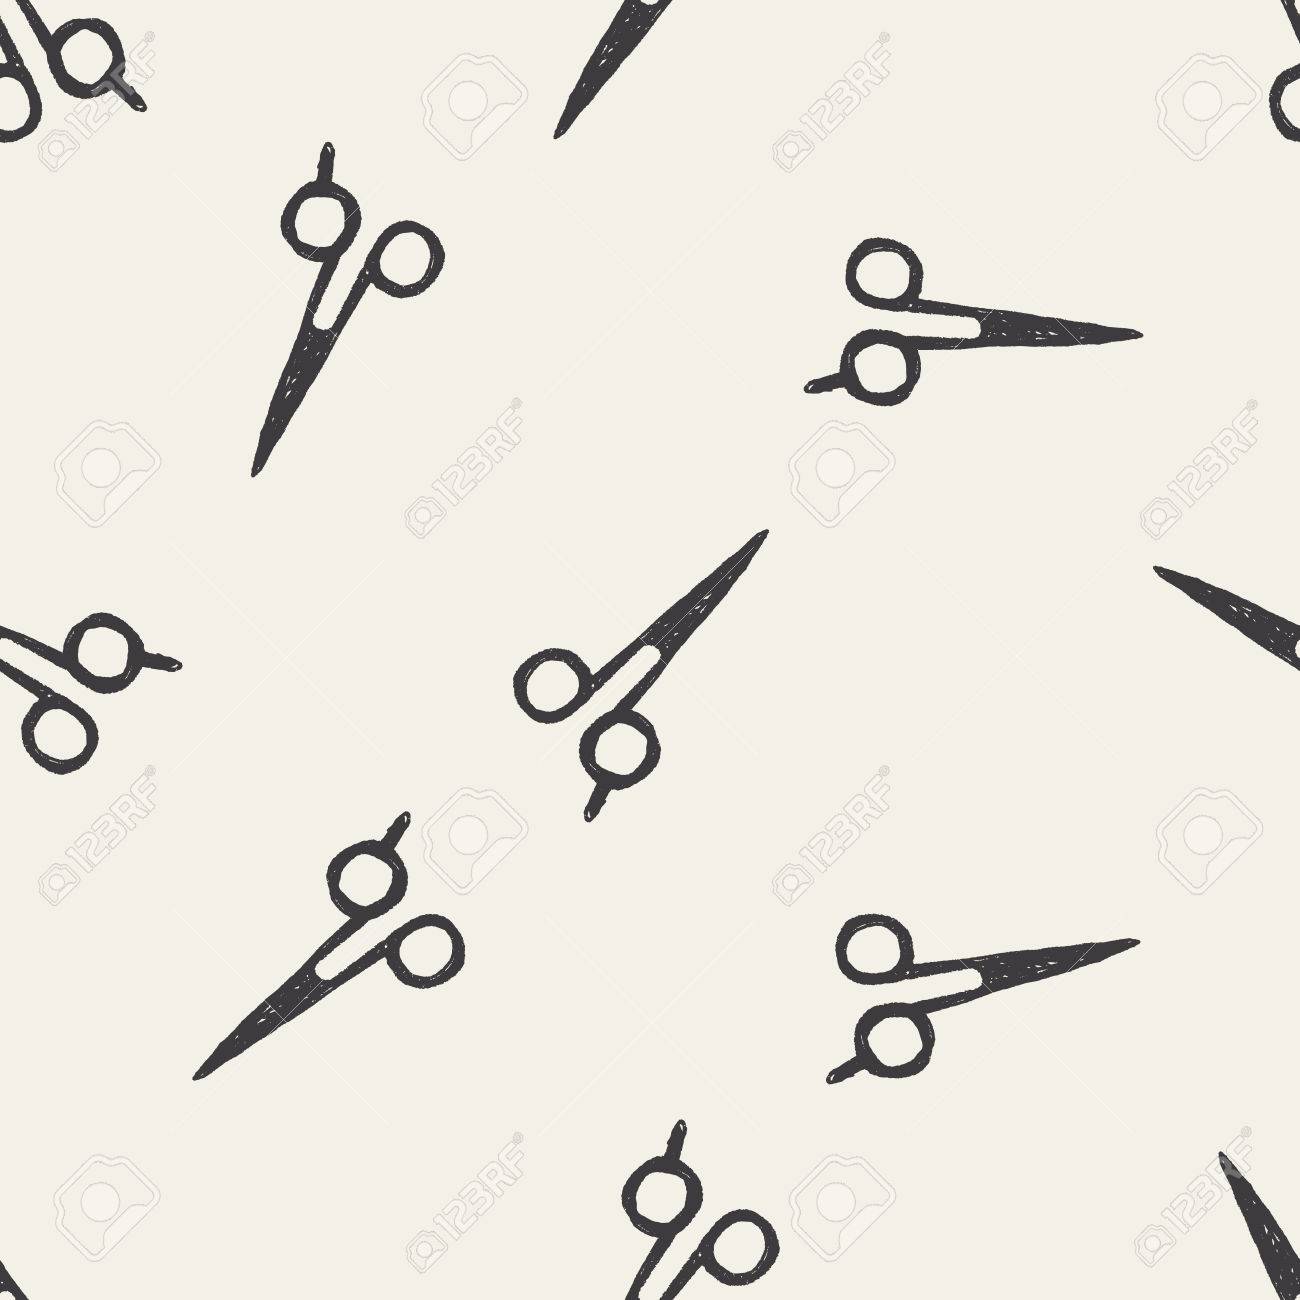 Hair Cutting Scissor Doodle Seamless Pattern Background Royalty